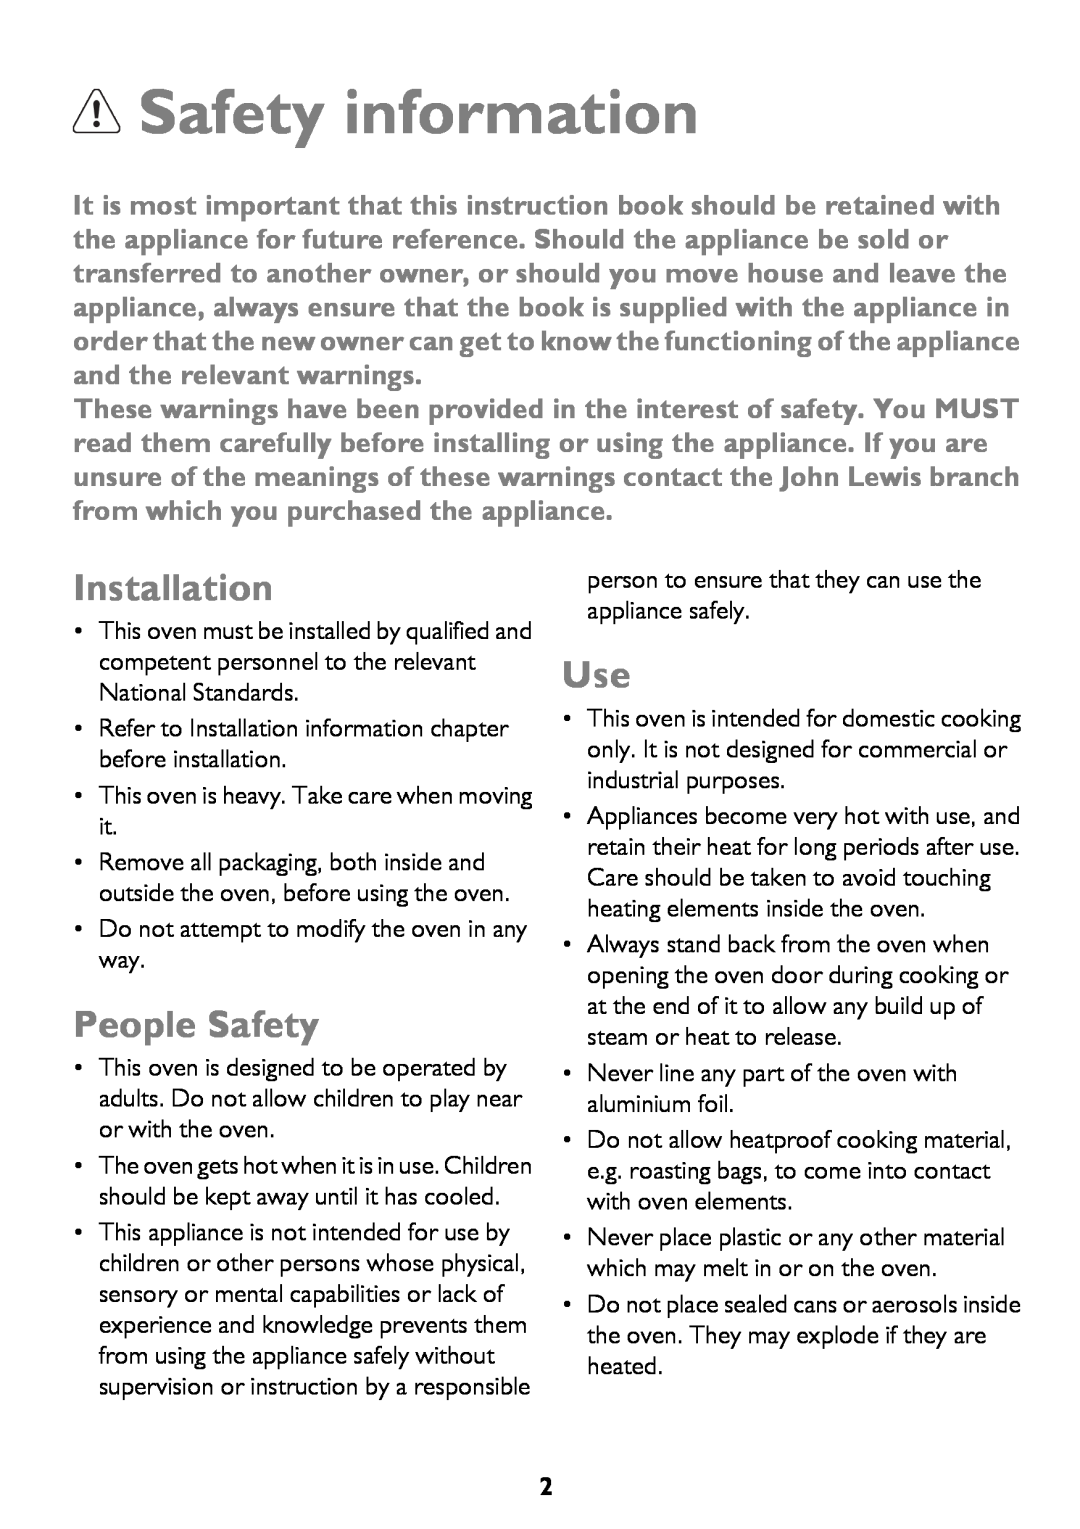 John Lewis JLBIOS662 instruction manual Safety information, Installation, People Safety 